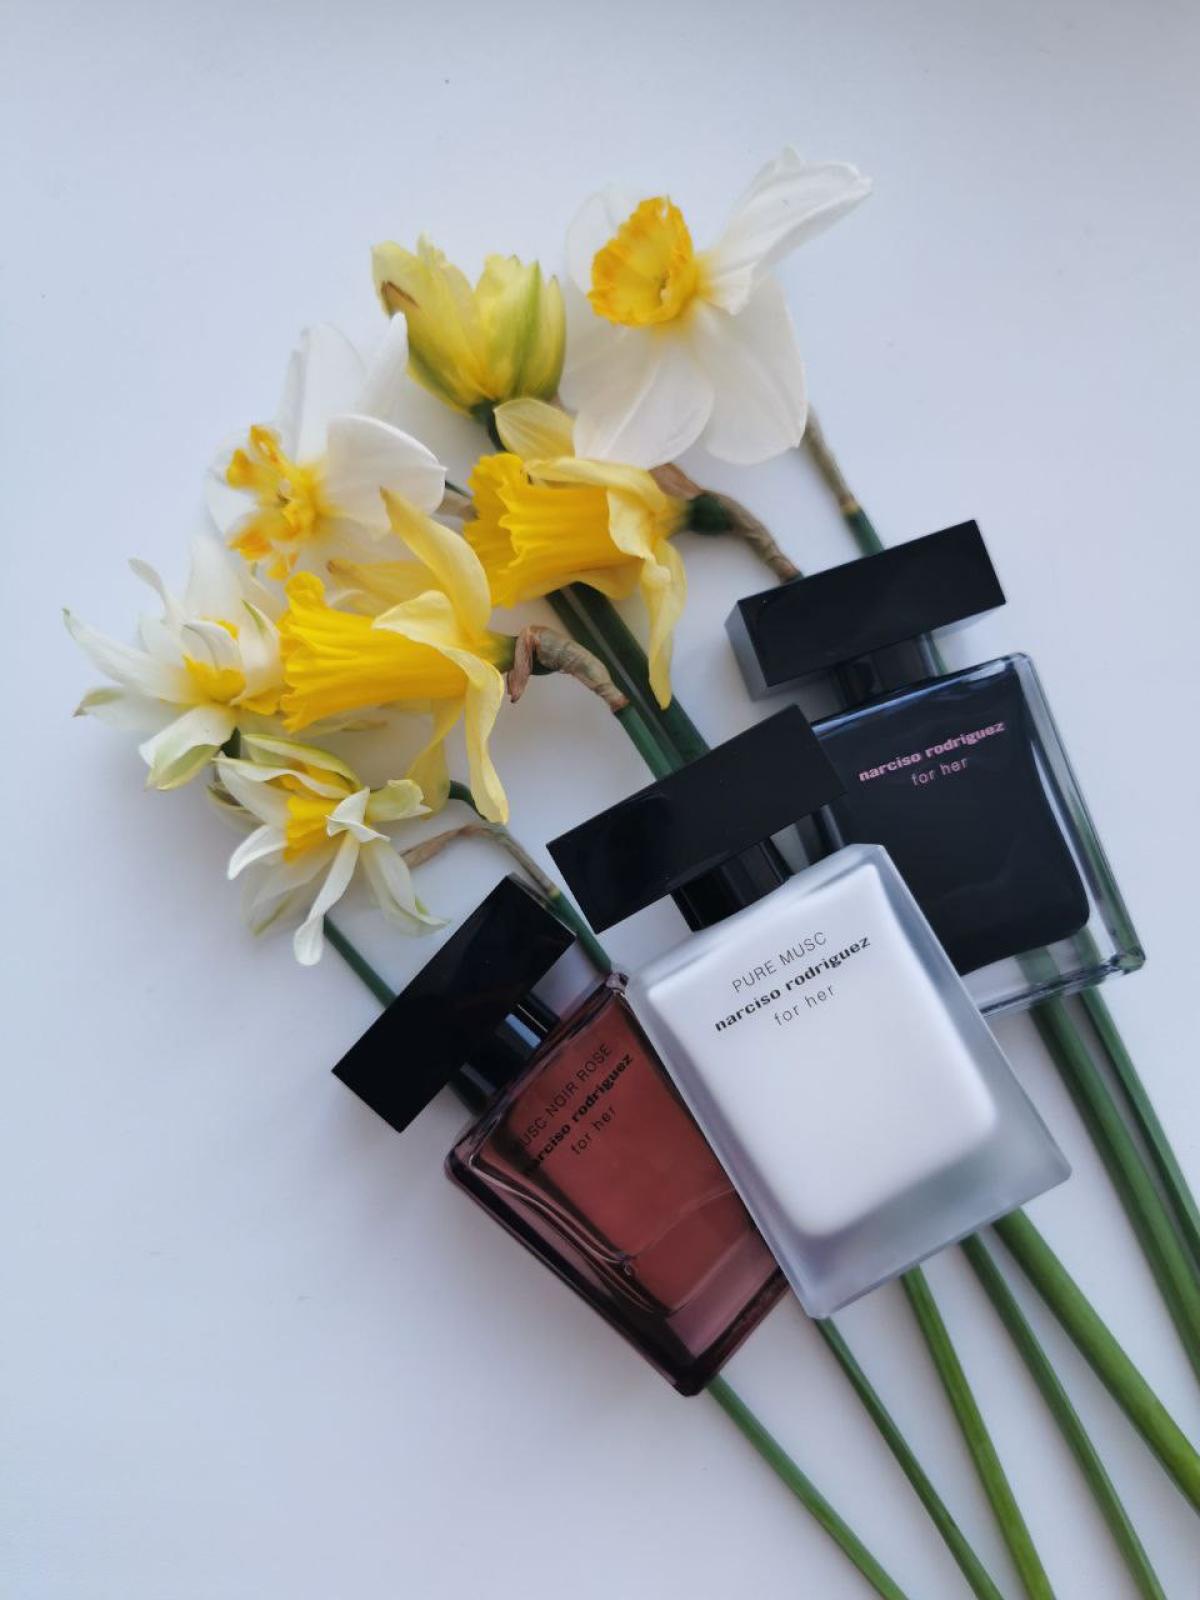 Narciso rodriguez musc noir rose. Нарциссо Родригес Musk Noir Rose for her. Narciso Rodriguez for her Musk Noir Rose. Narciso Rodriguez Musk for her Rose.